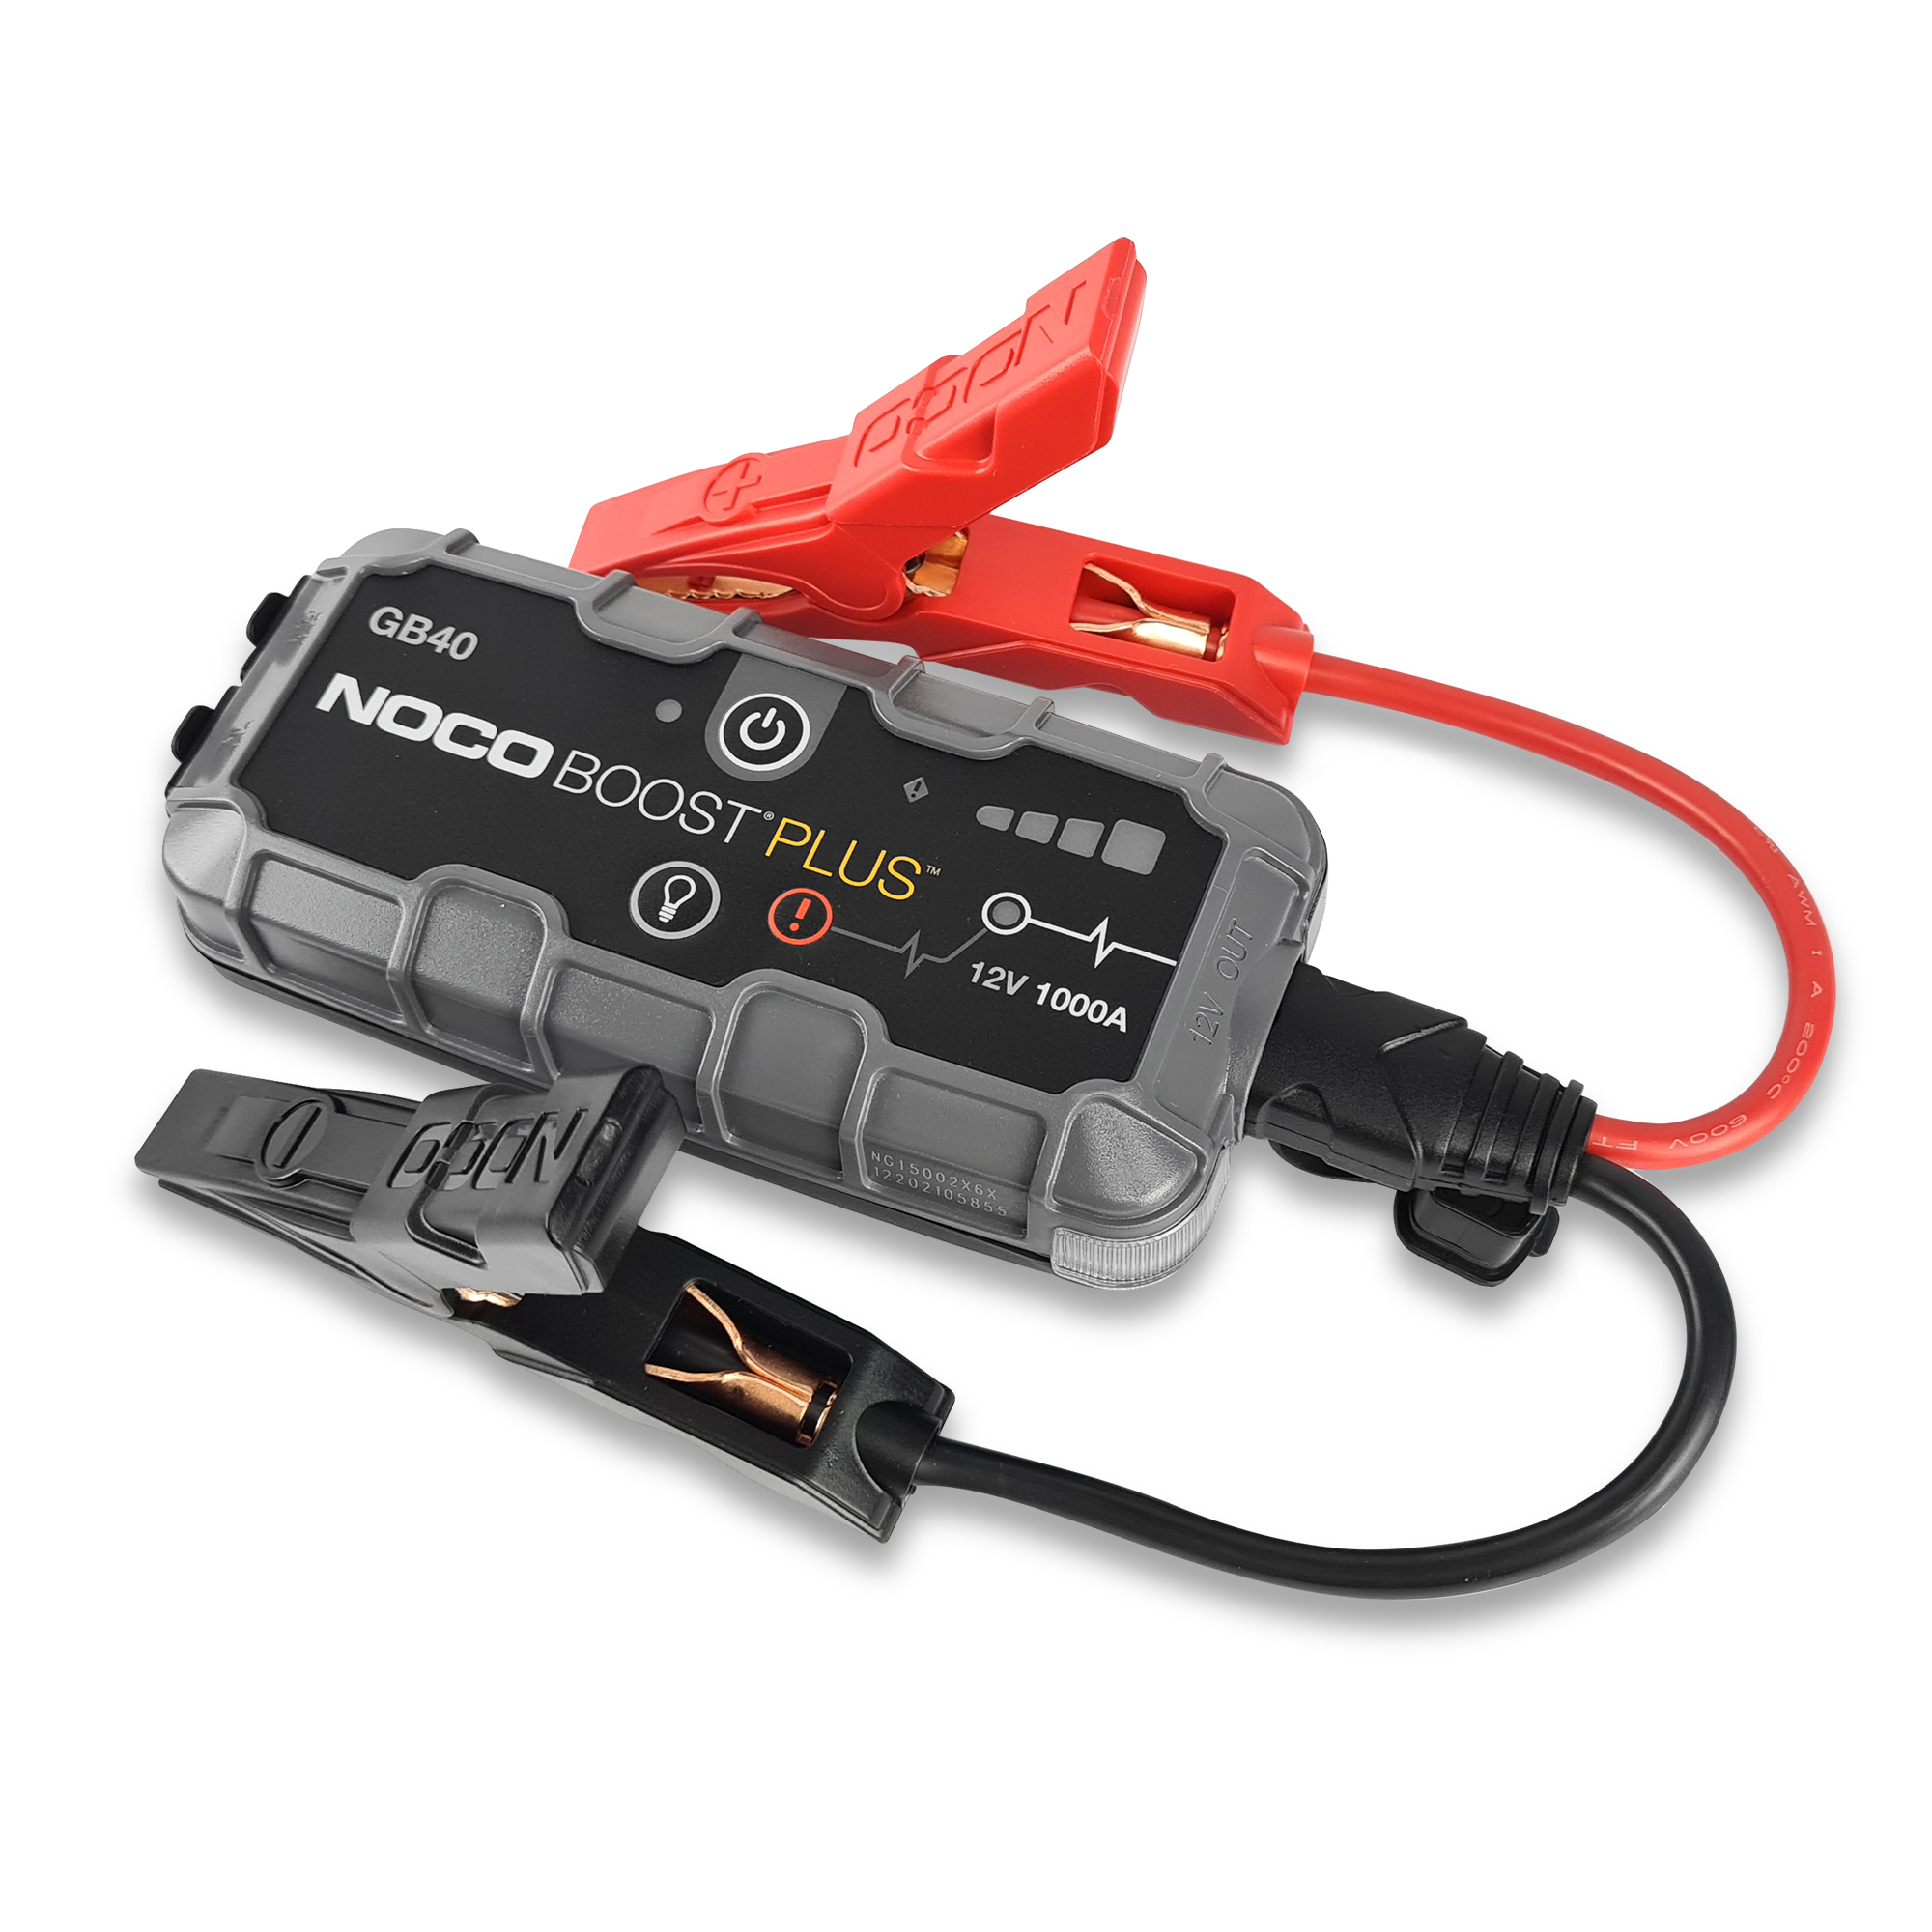 NOCO Boost Plus GB40 1000A 12V UltraSafe Portable Lithium Jump Starter